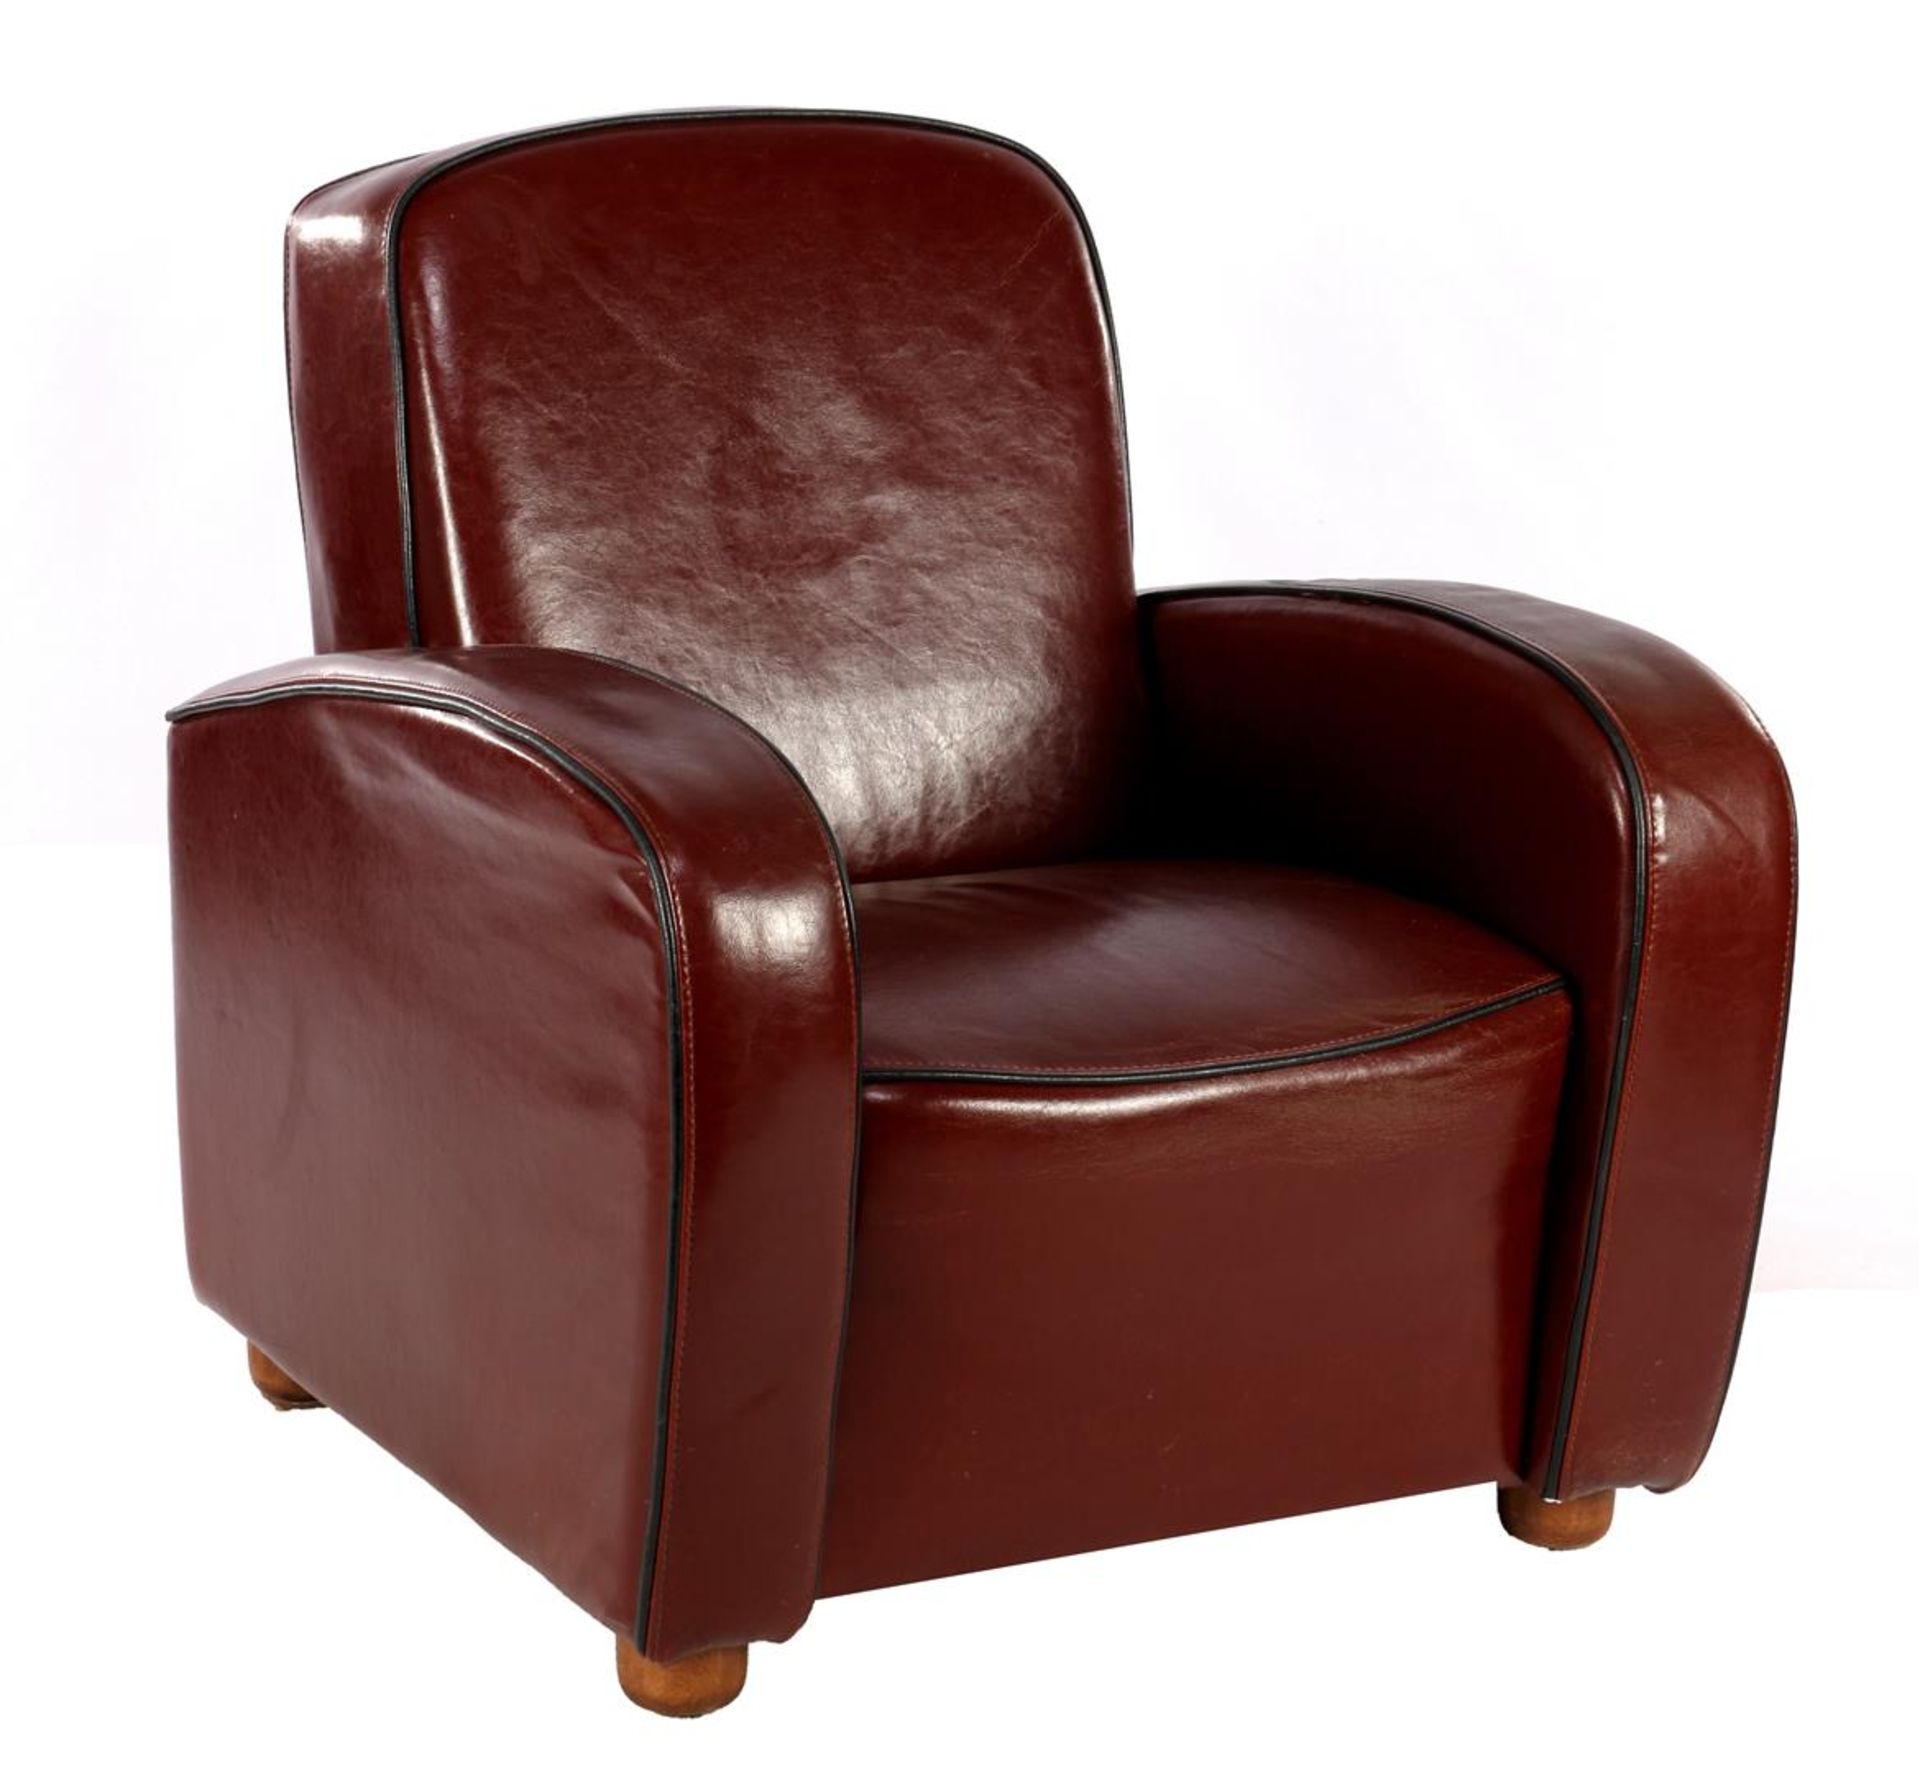 Brown leather armchair with black edges